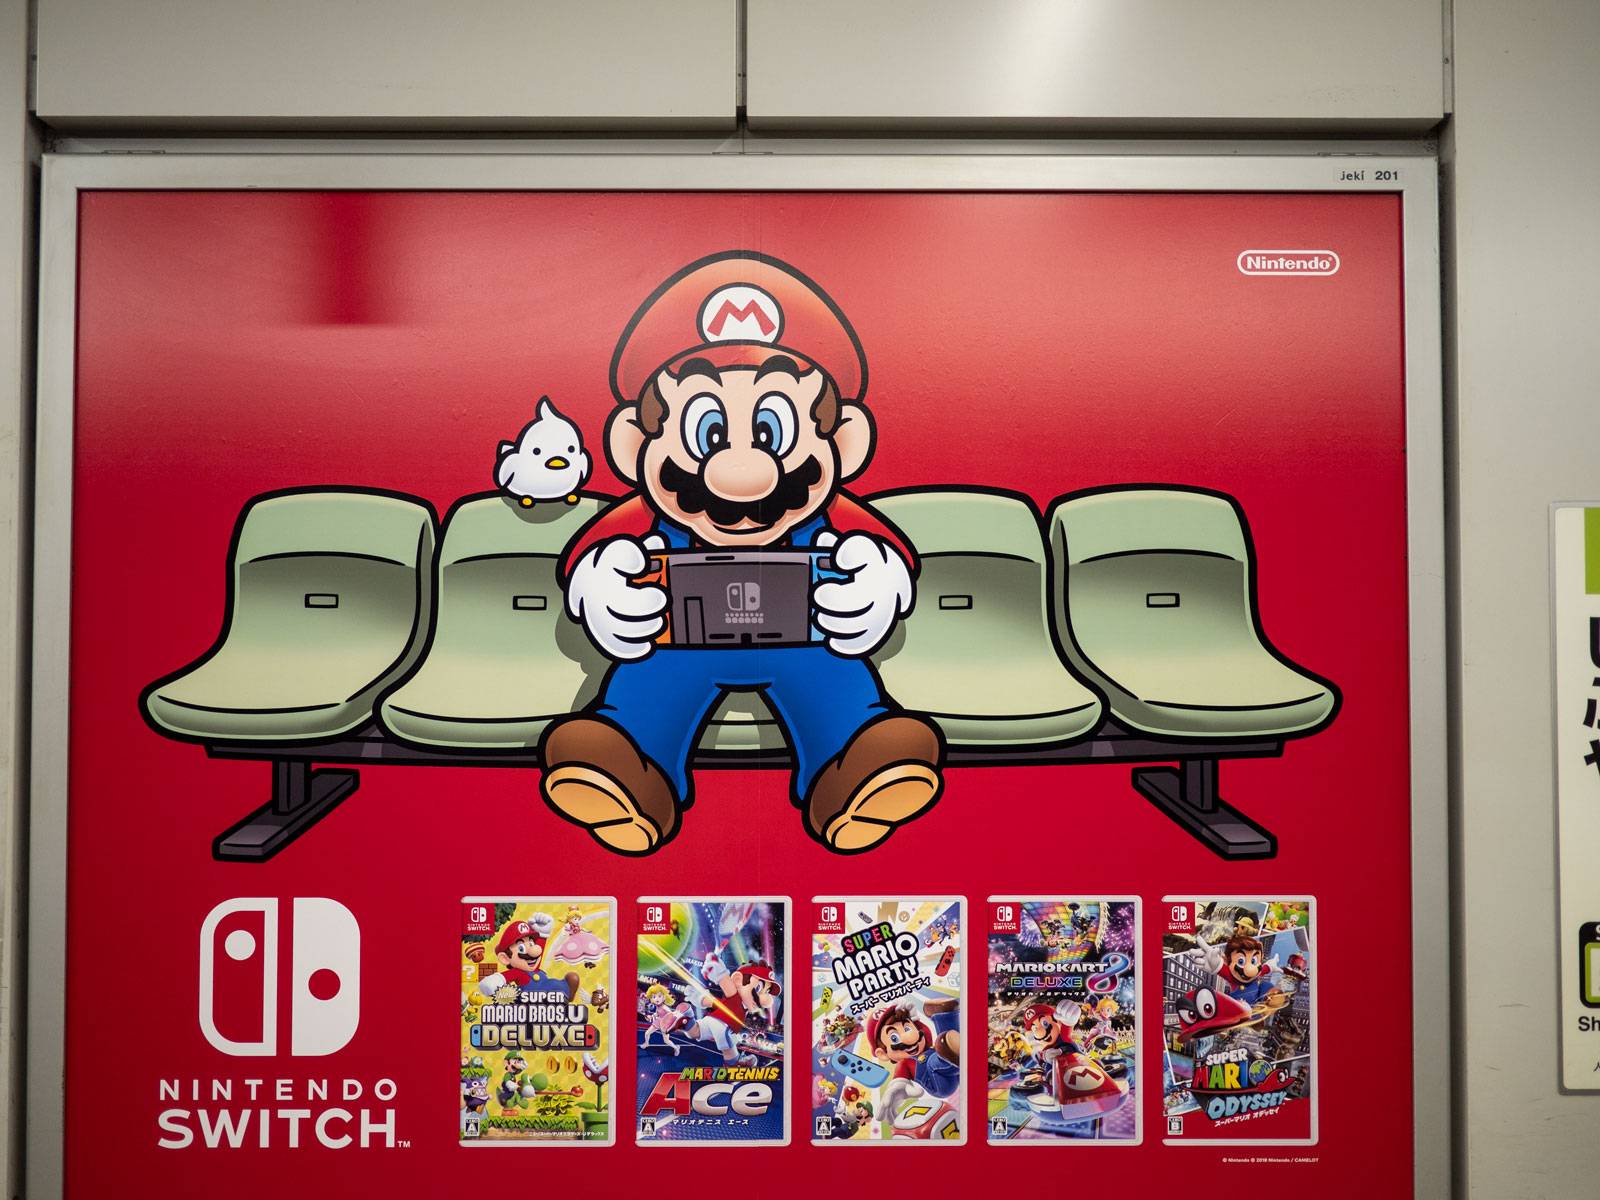 A Nintendo Switch ad featuring Mario